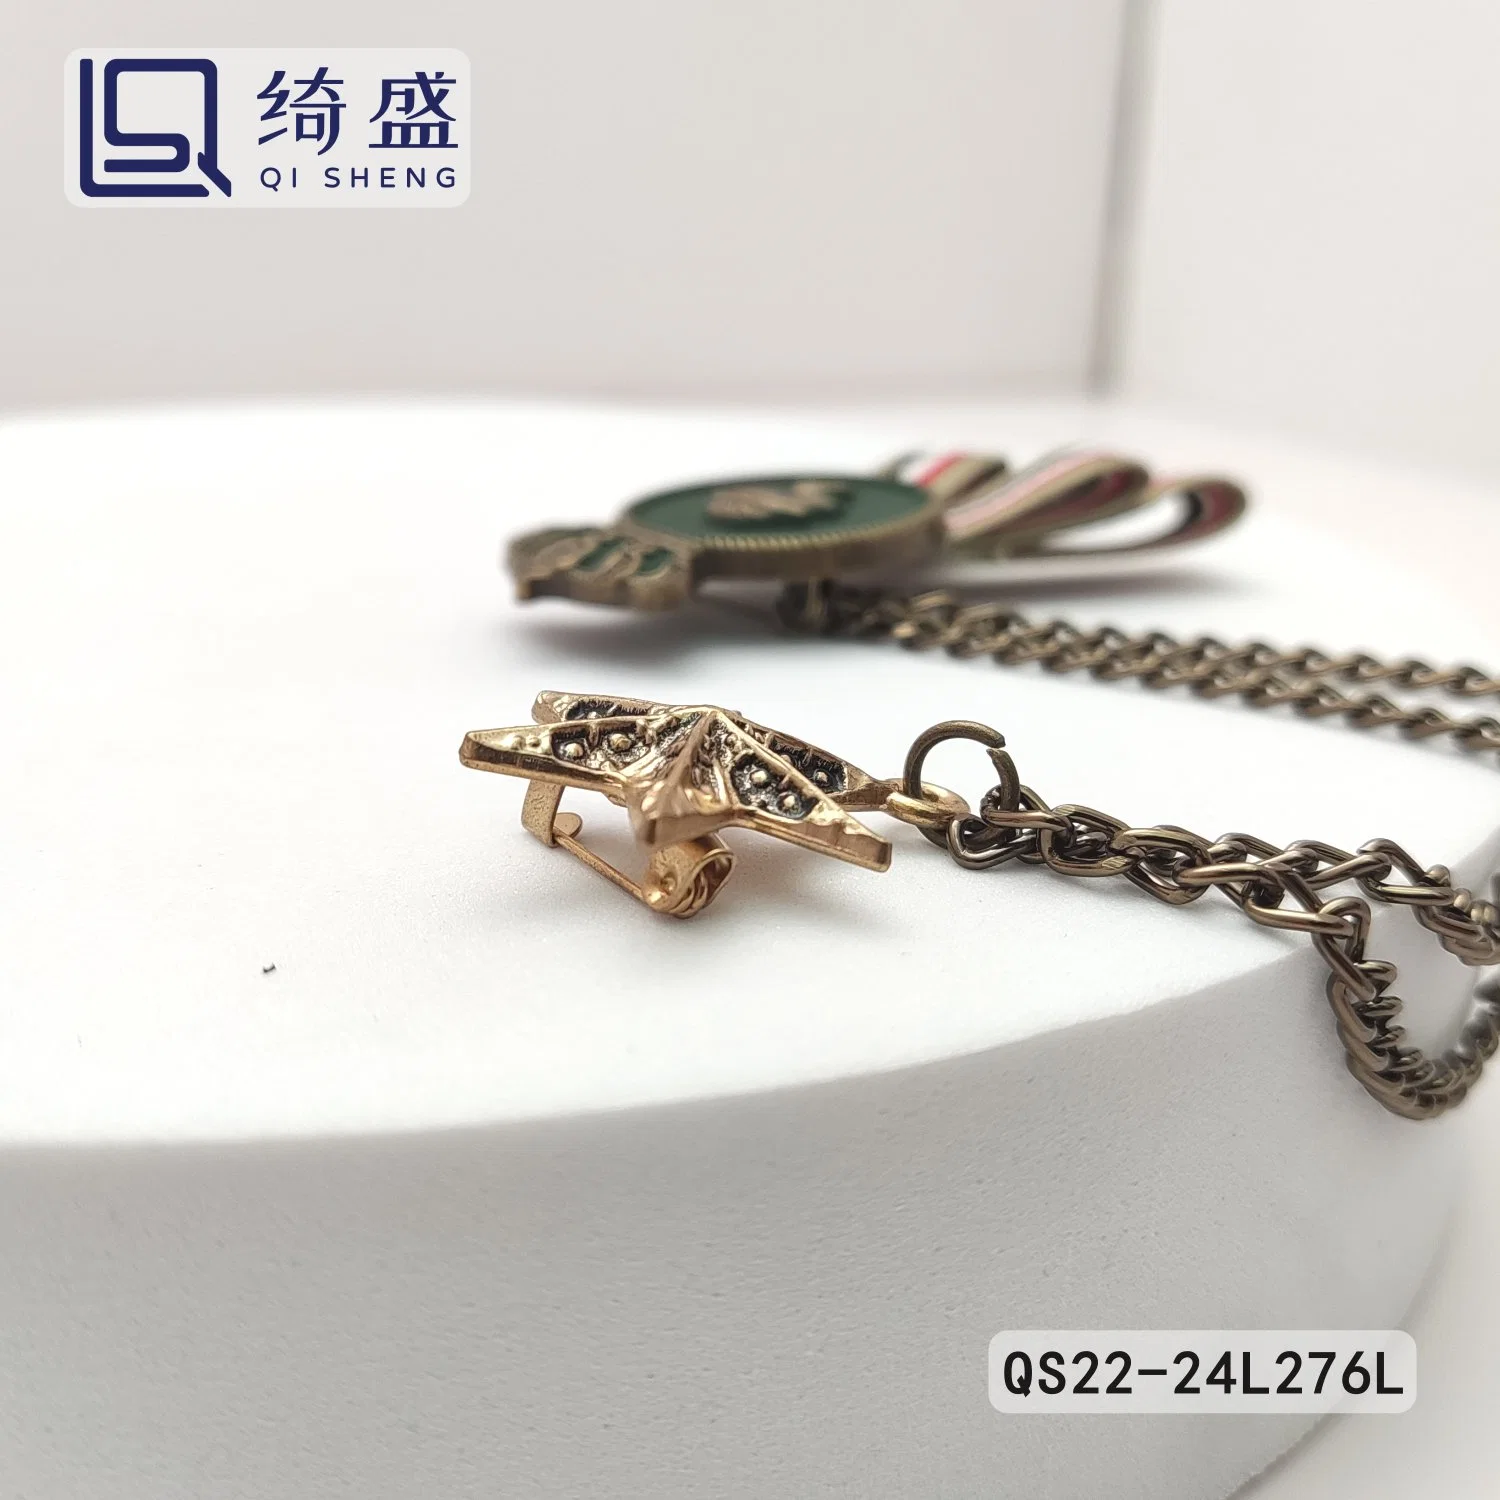 High quality/High cost performance New Design Webbing Metal Brooch with Chain/Retro Star Style Brooch